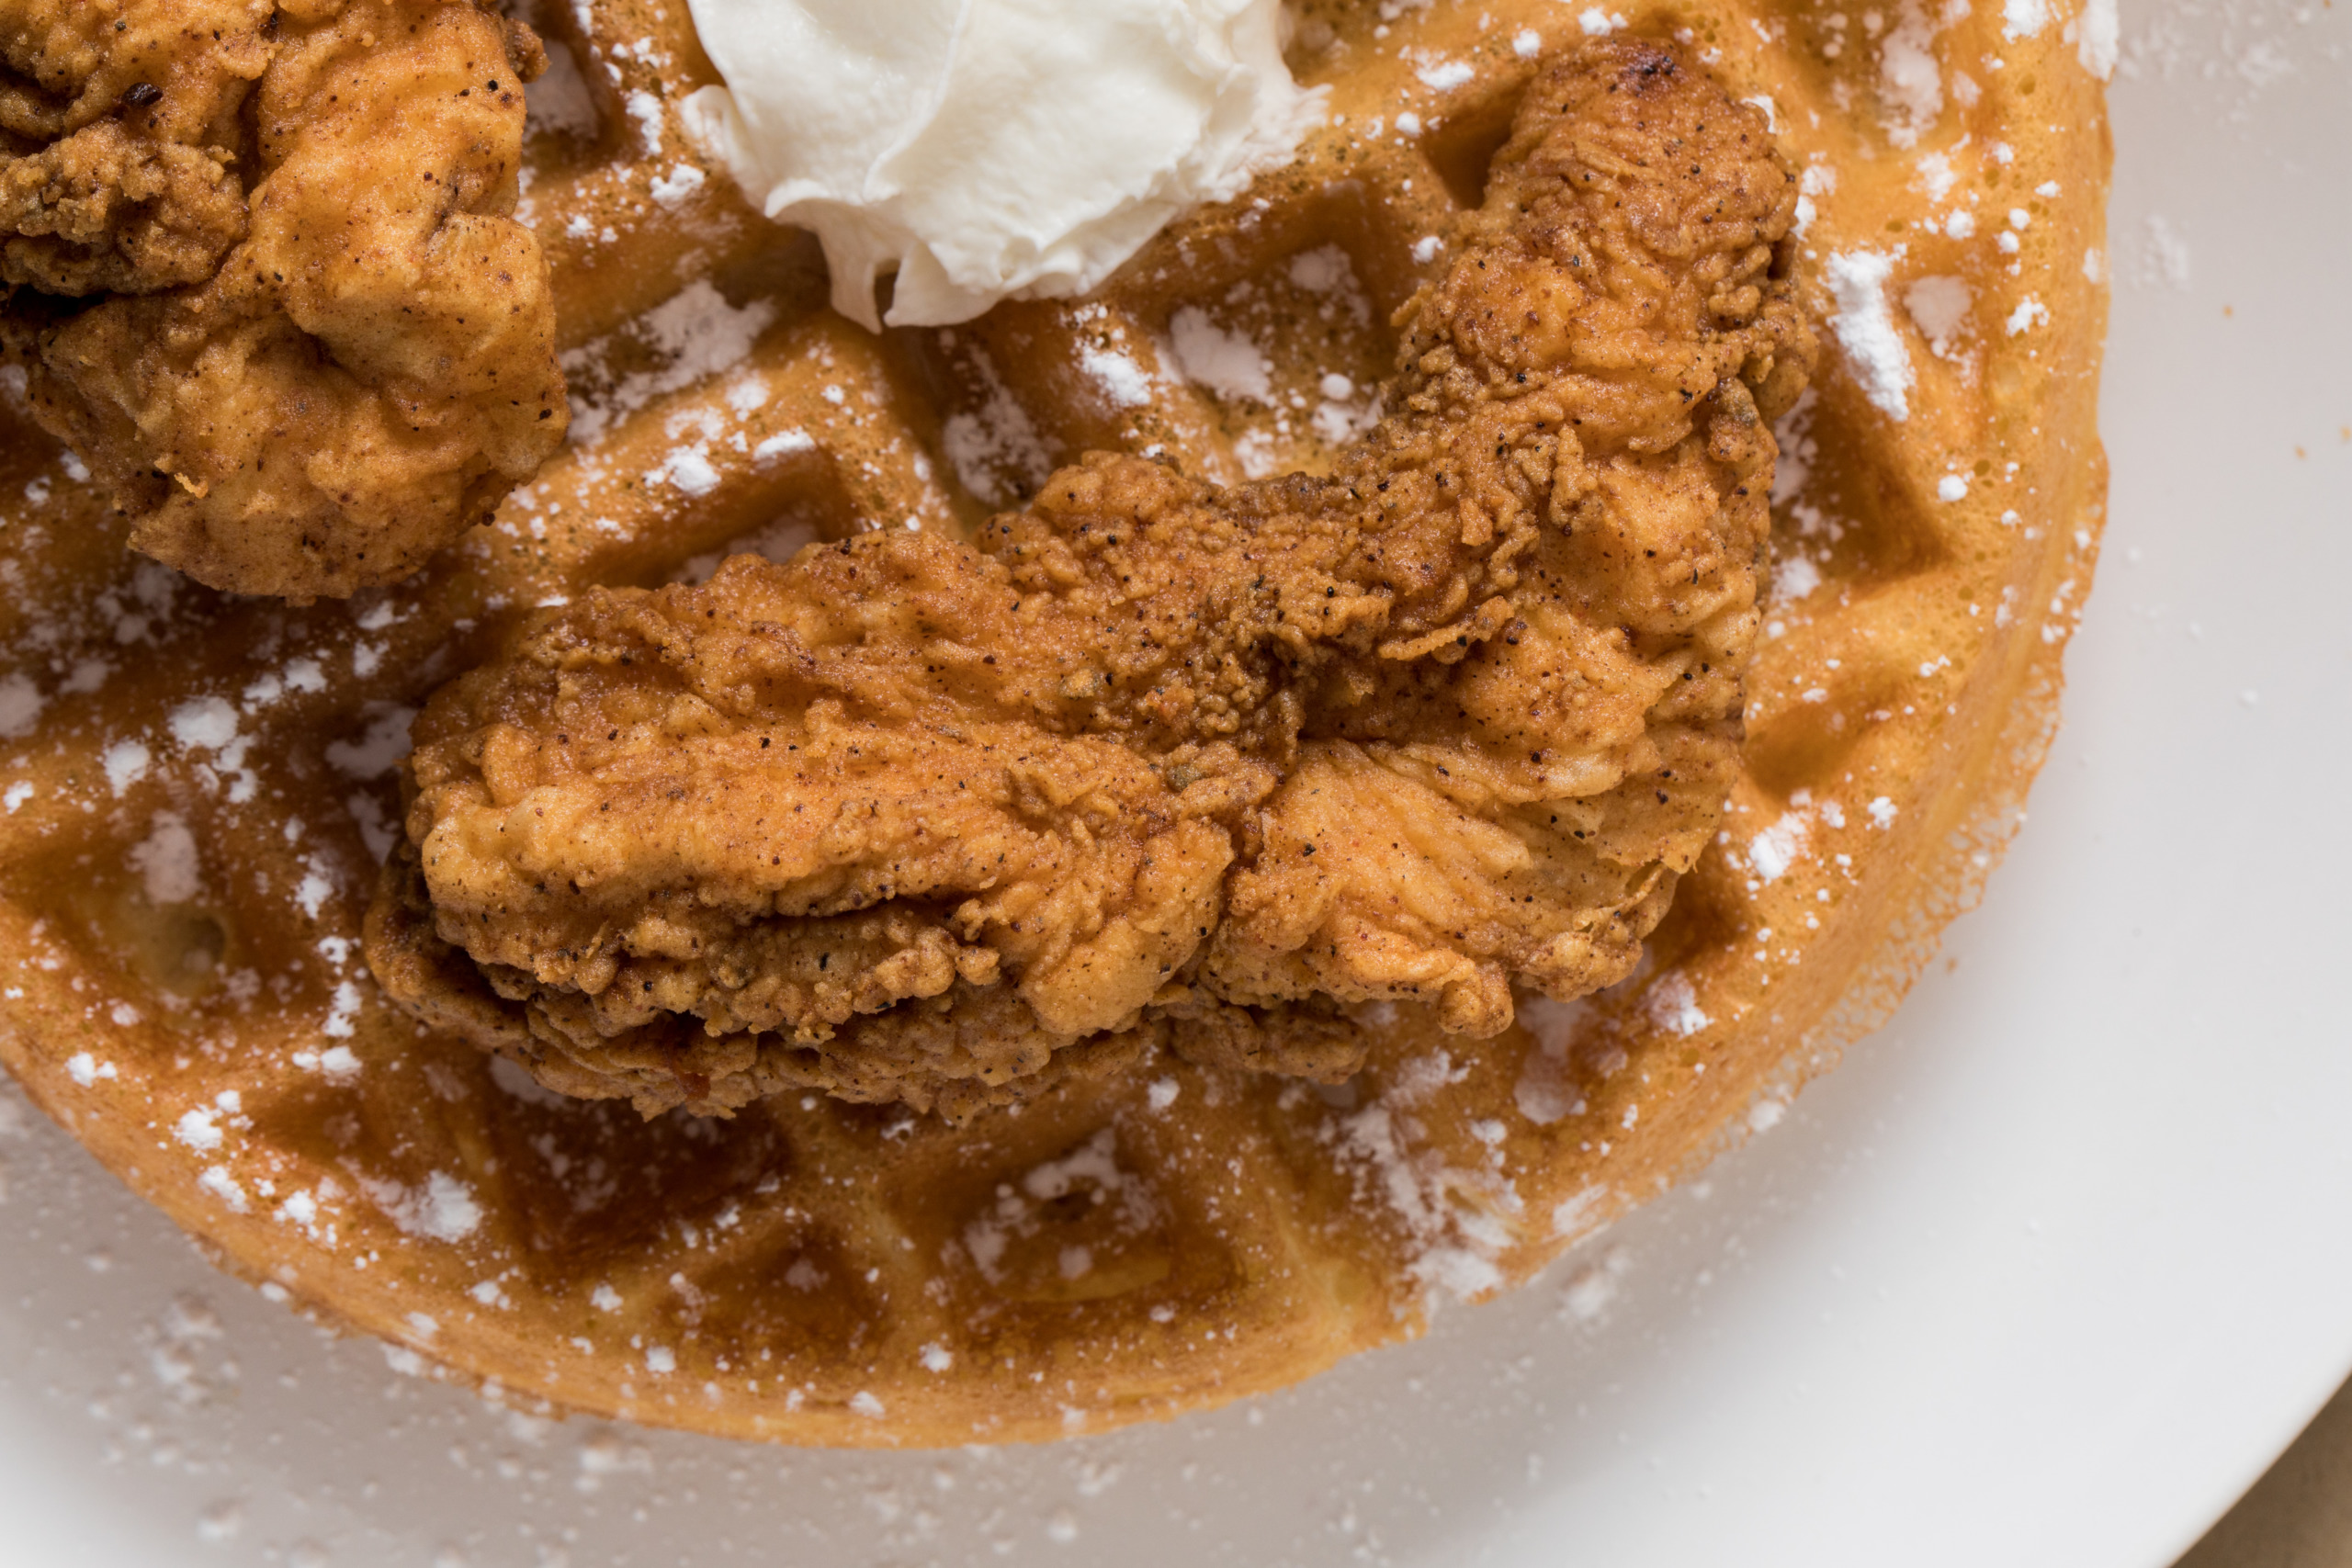 A plate of fried chicken and waffles topped with whipped cream